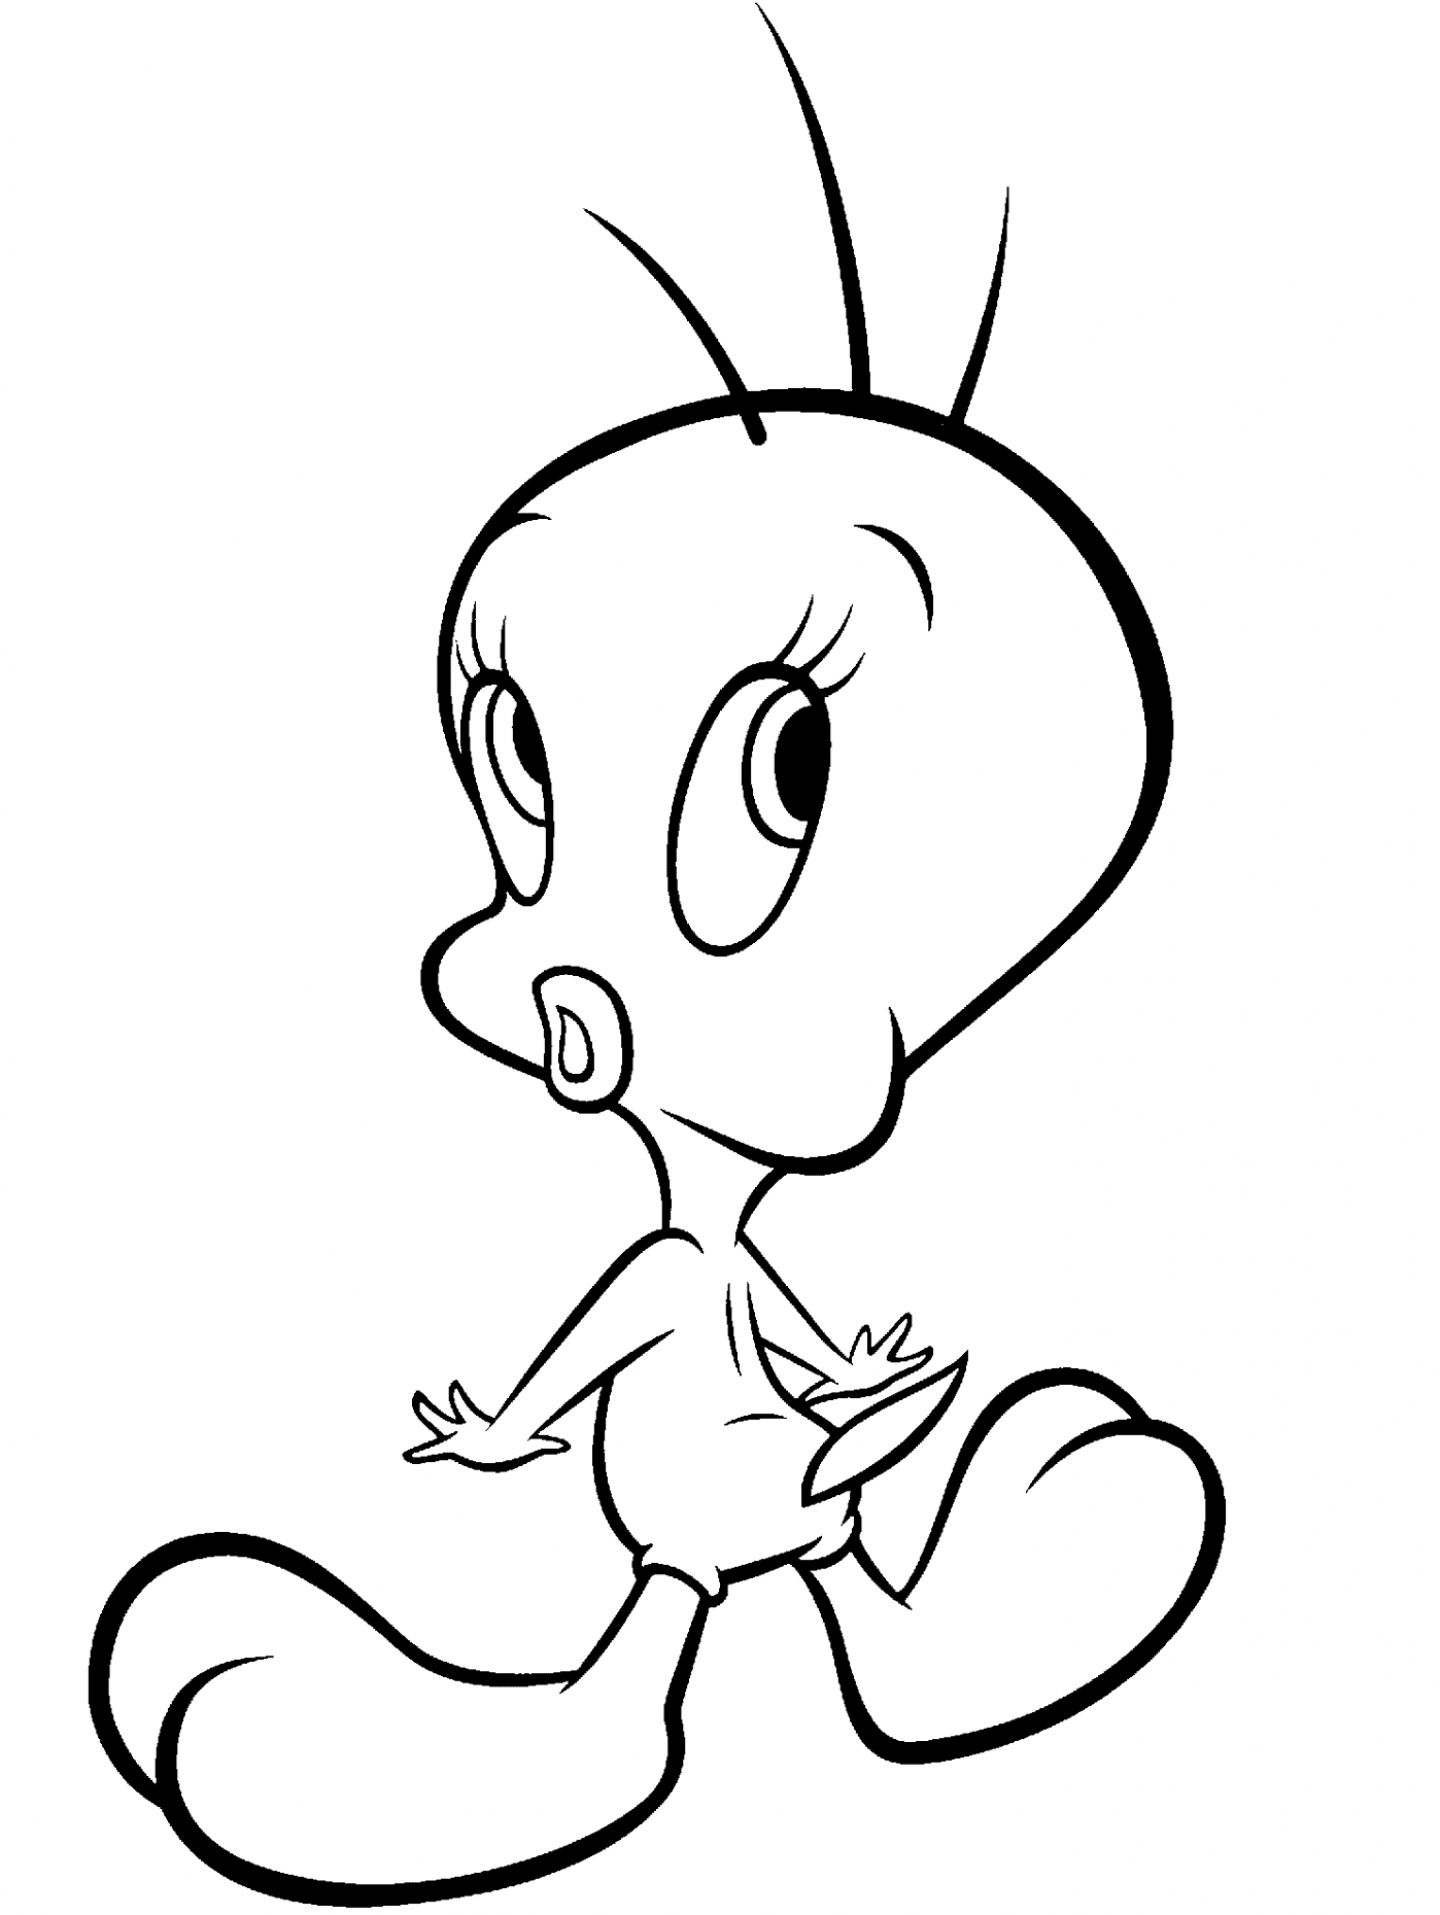 Tweety bird coloring pages ginormasource kids - ClipArt Best ...